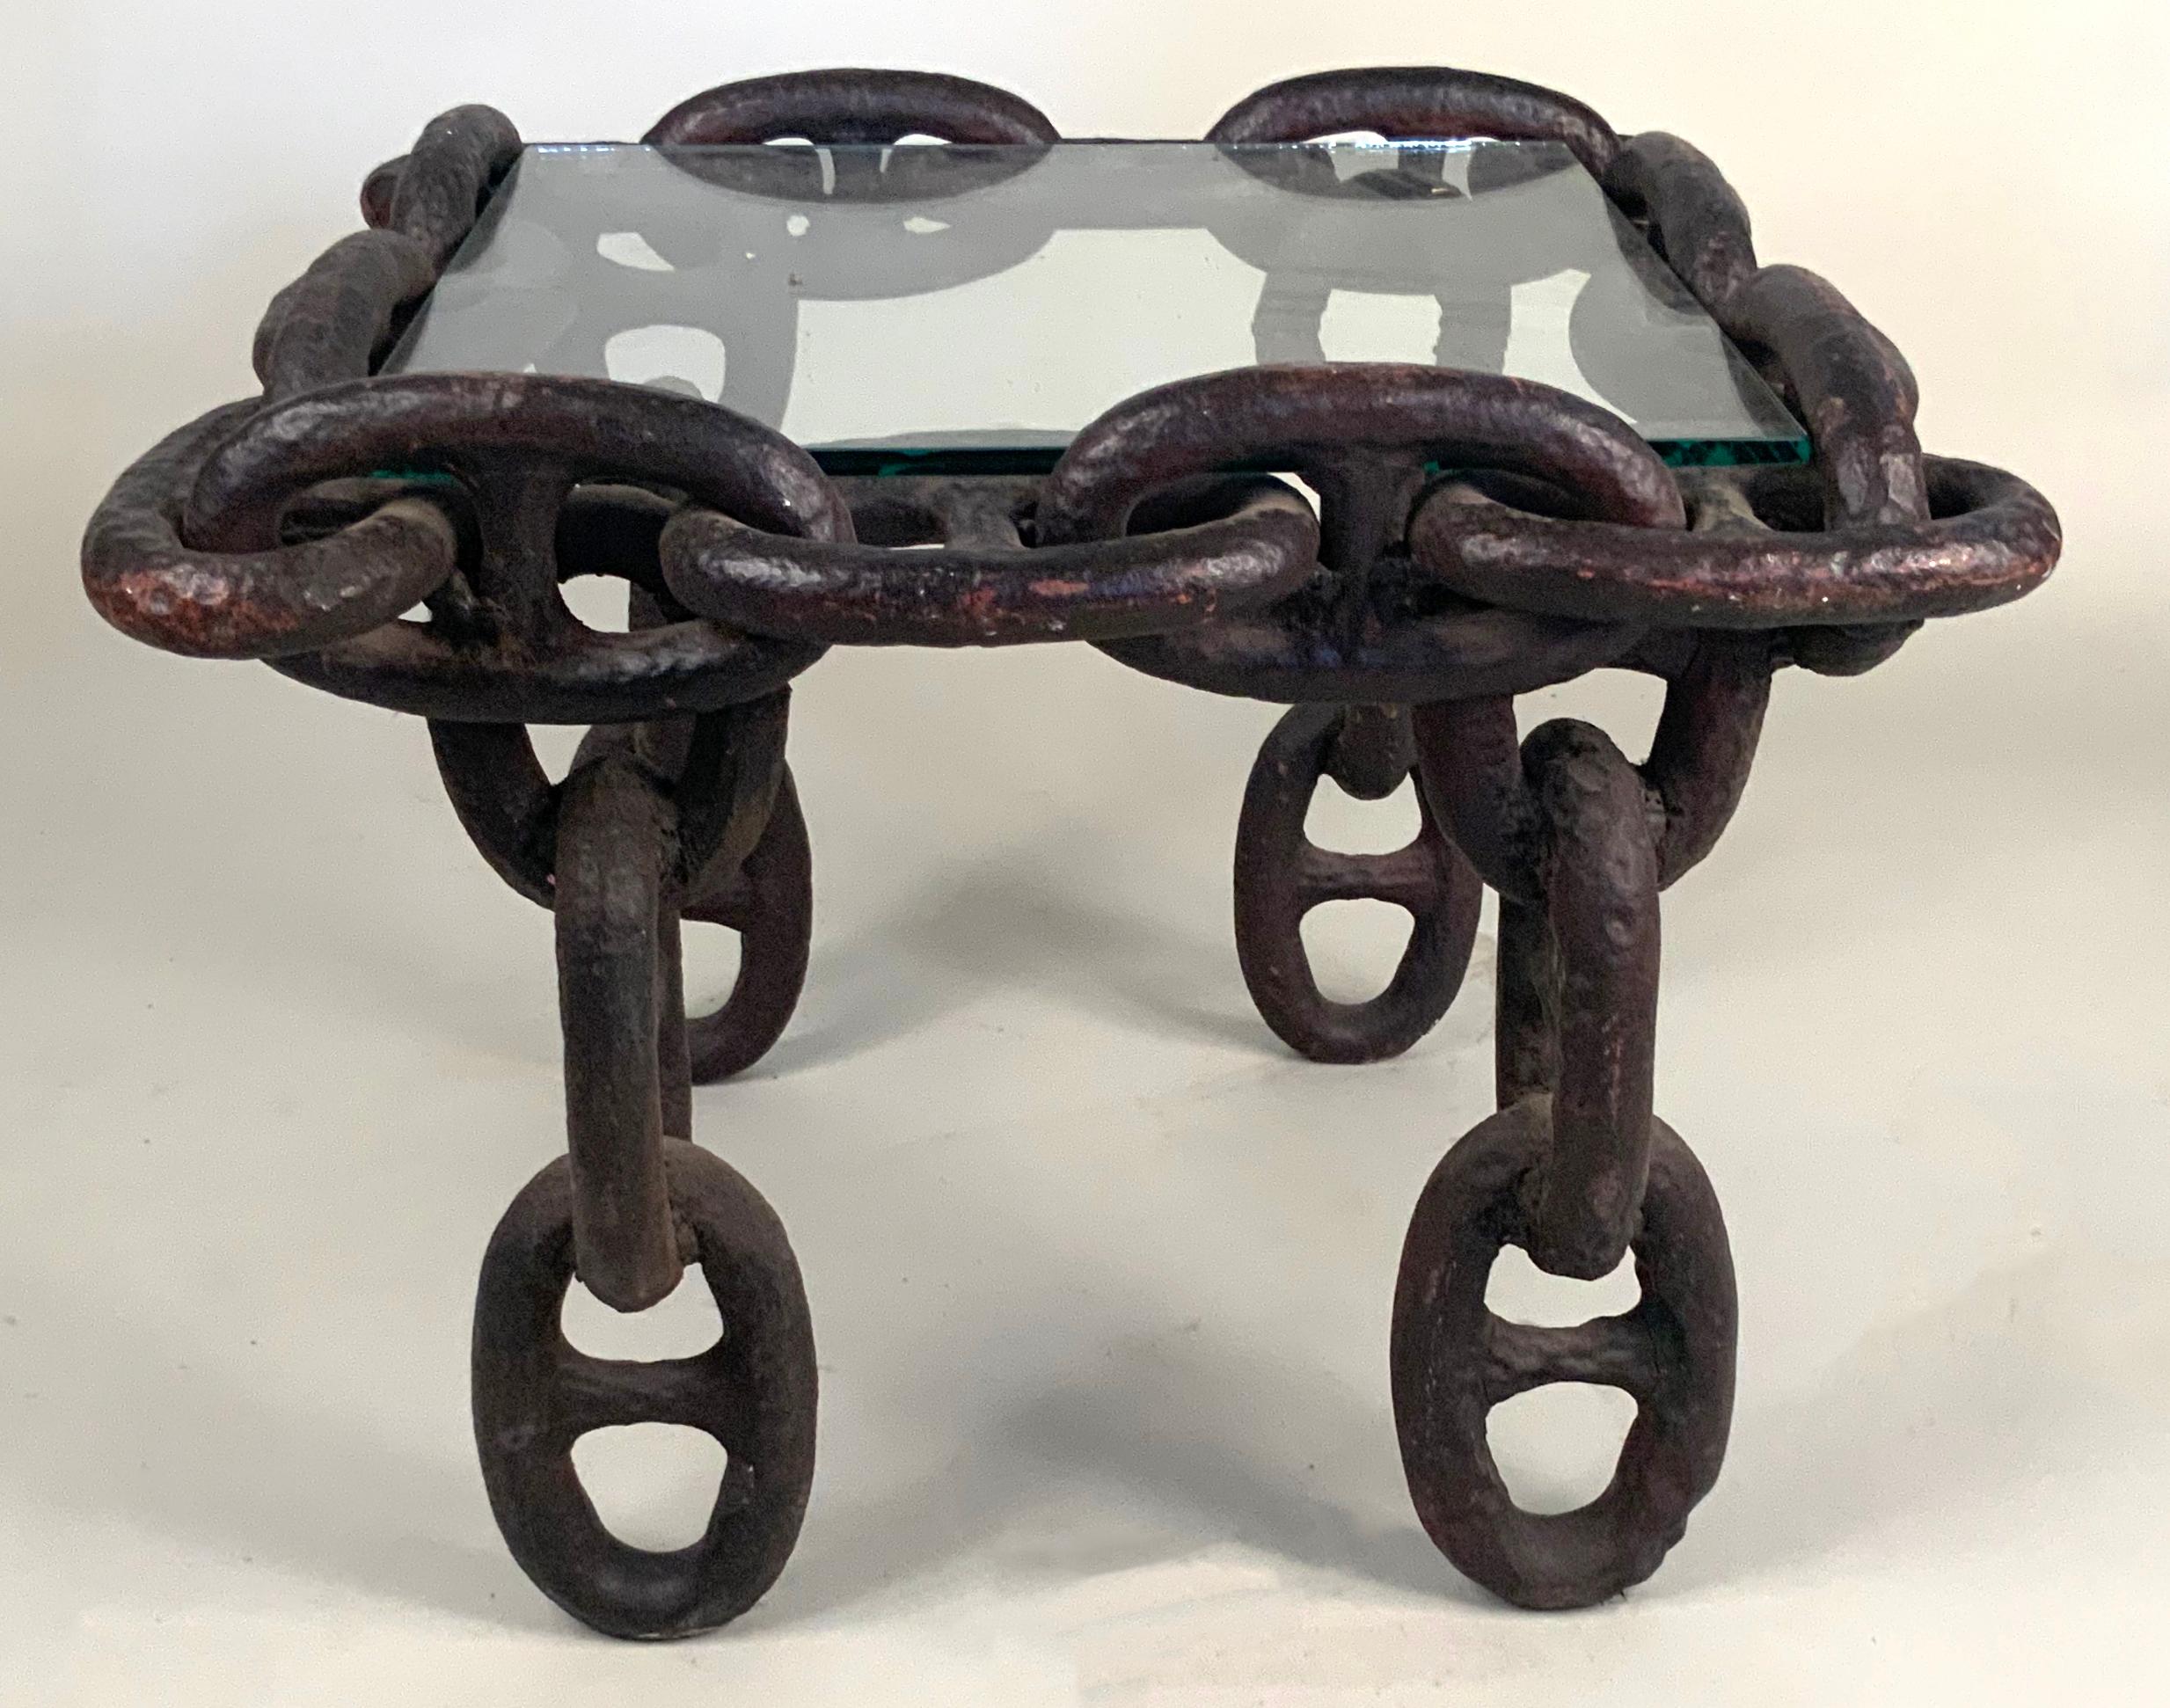 A unique antique 1940s side table or coffee table with the frame made entirely of large link in cast iron, designed to be fitted with a stone or glass top. The table currently has a glass top. Its a wonderful design in material and scale, very well